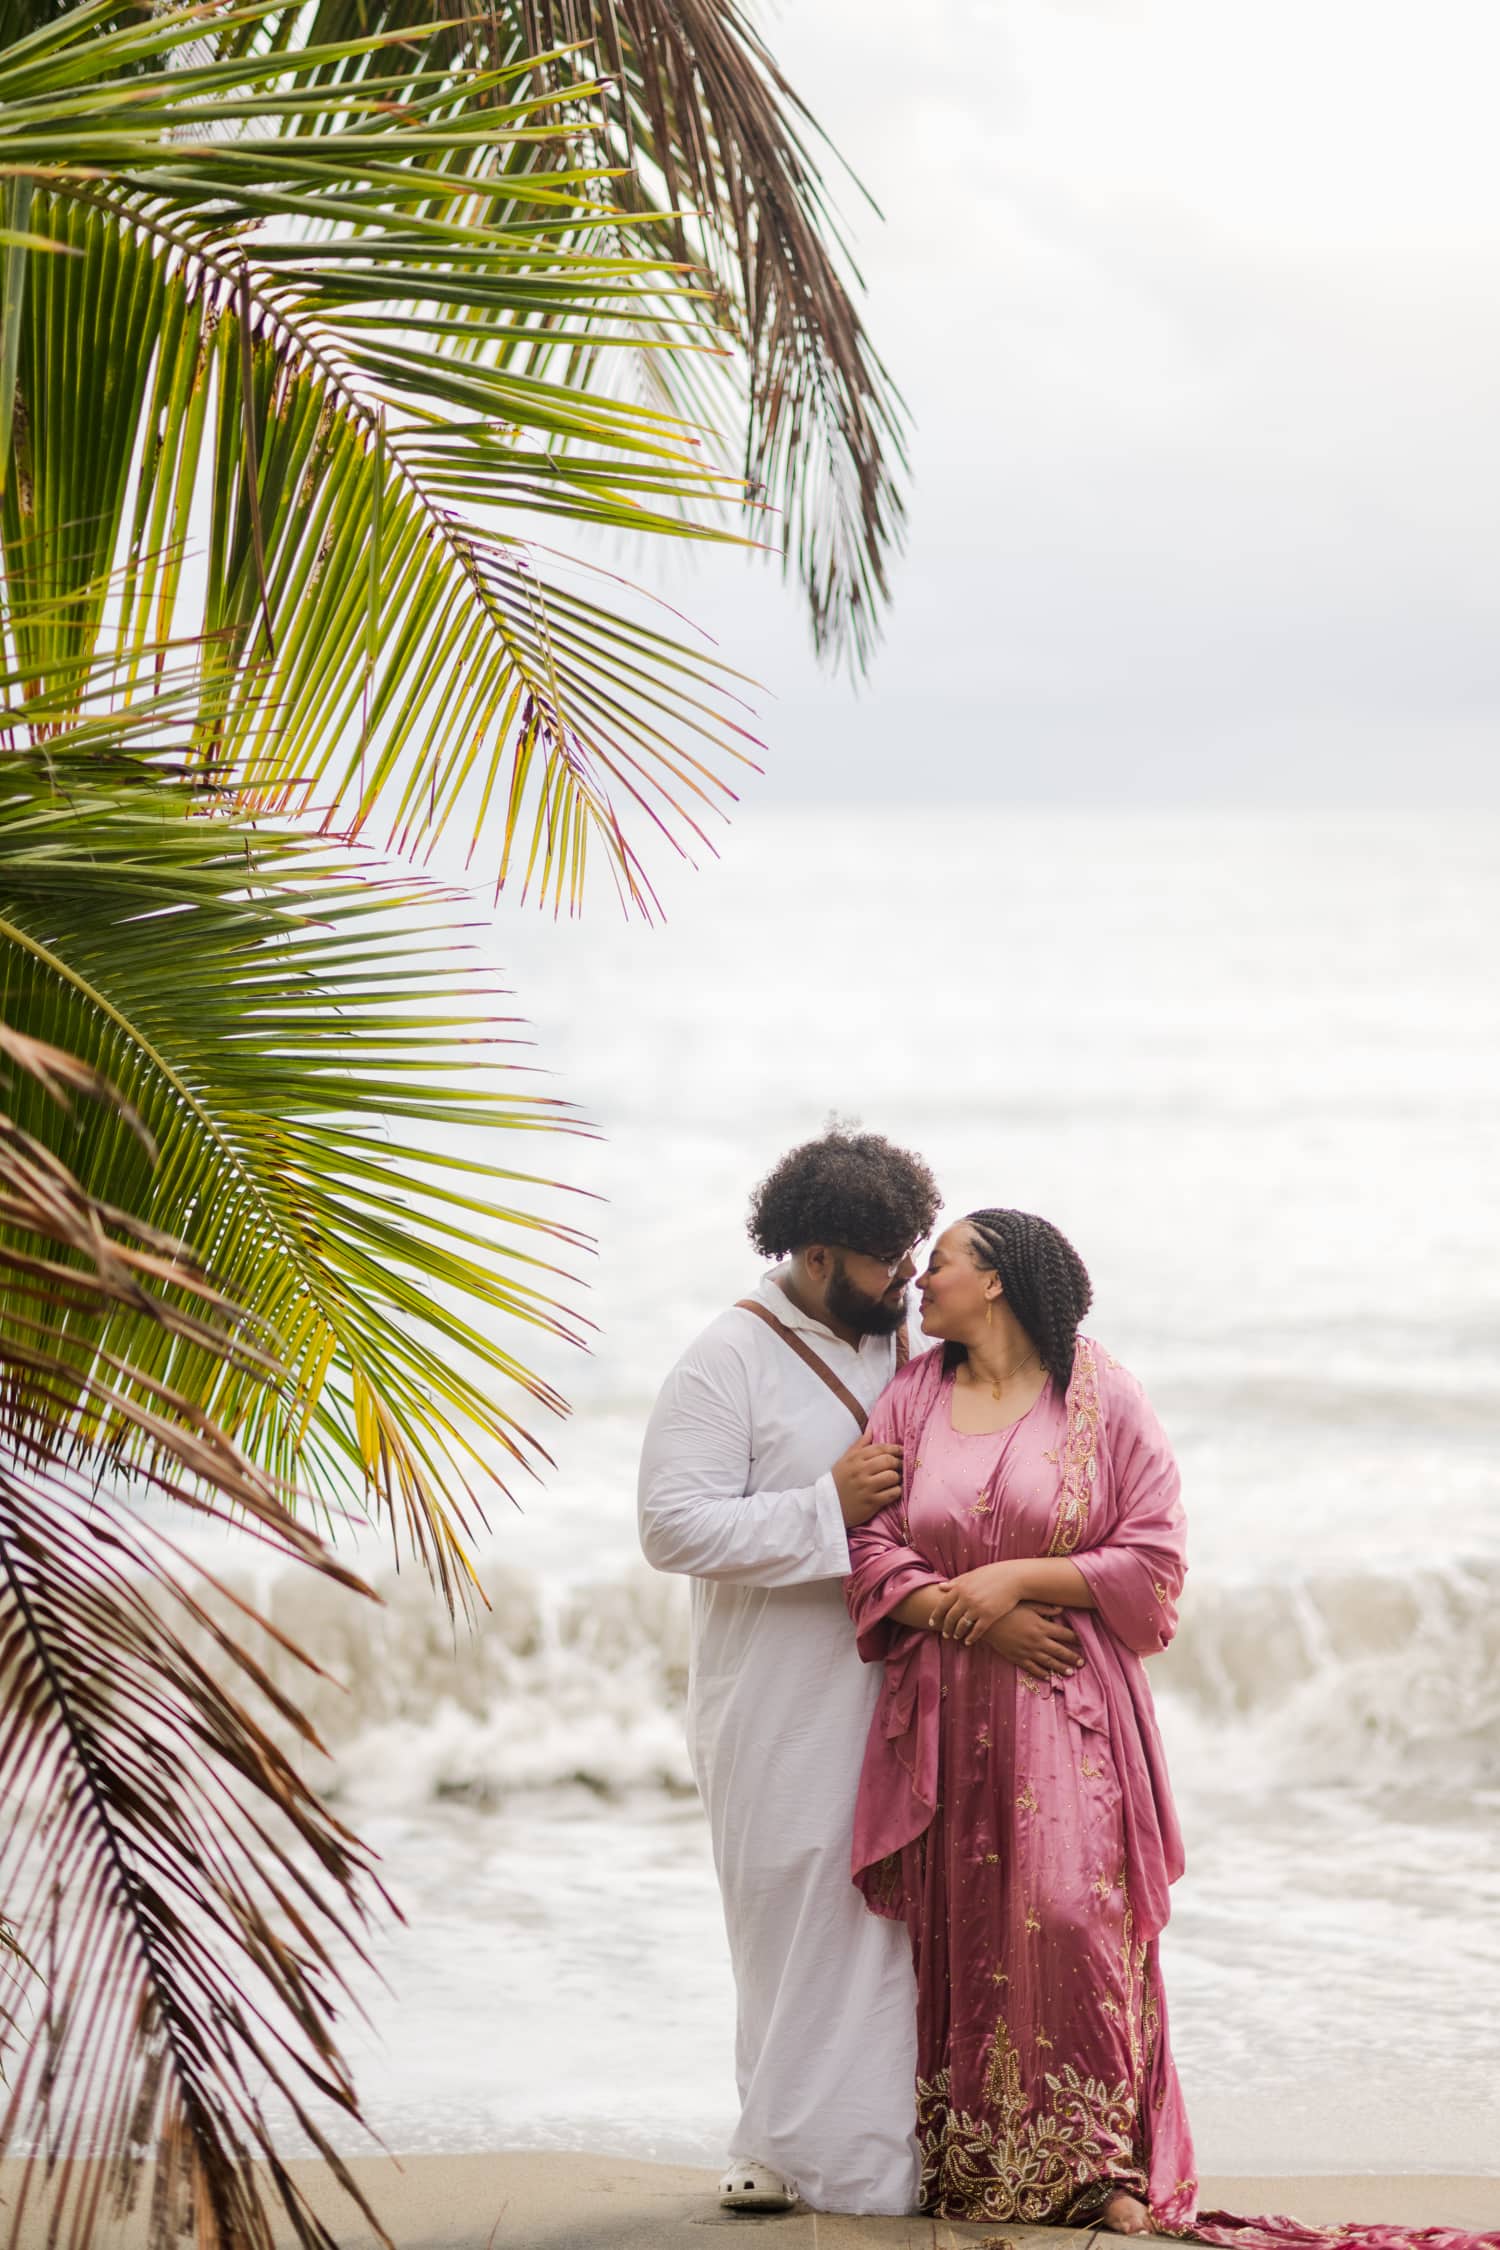 Somali Engagement Photoshoot at Maunabo’s Black Sand Beach. The couple wearing Somali engagement attire on a beach with really unique sand & beautiful views.